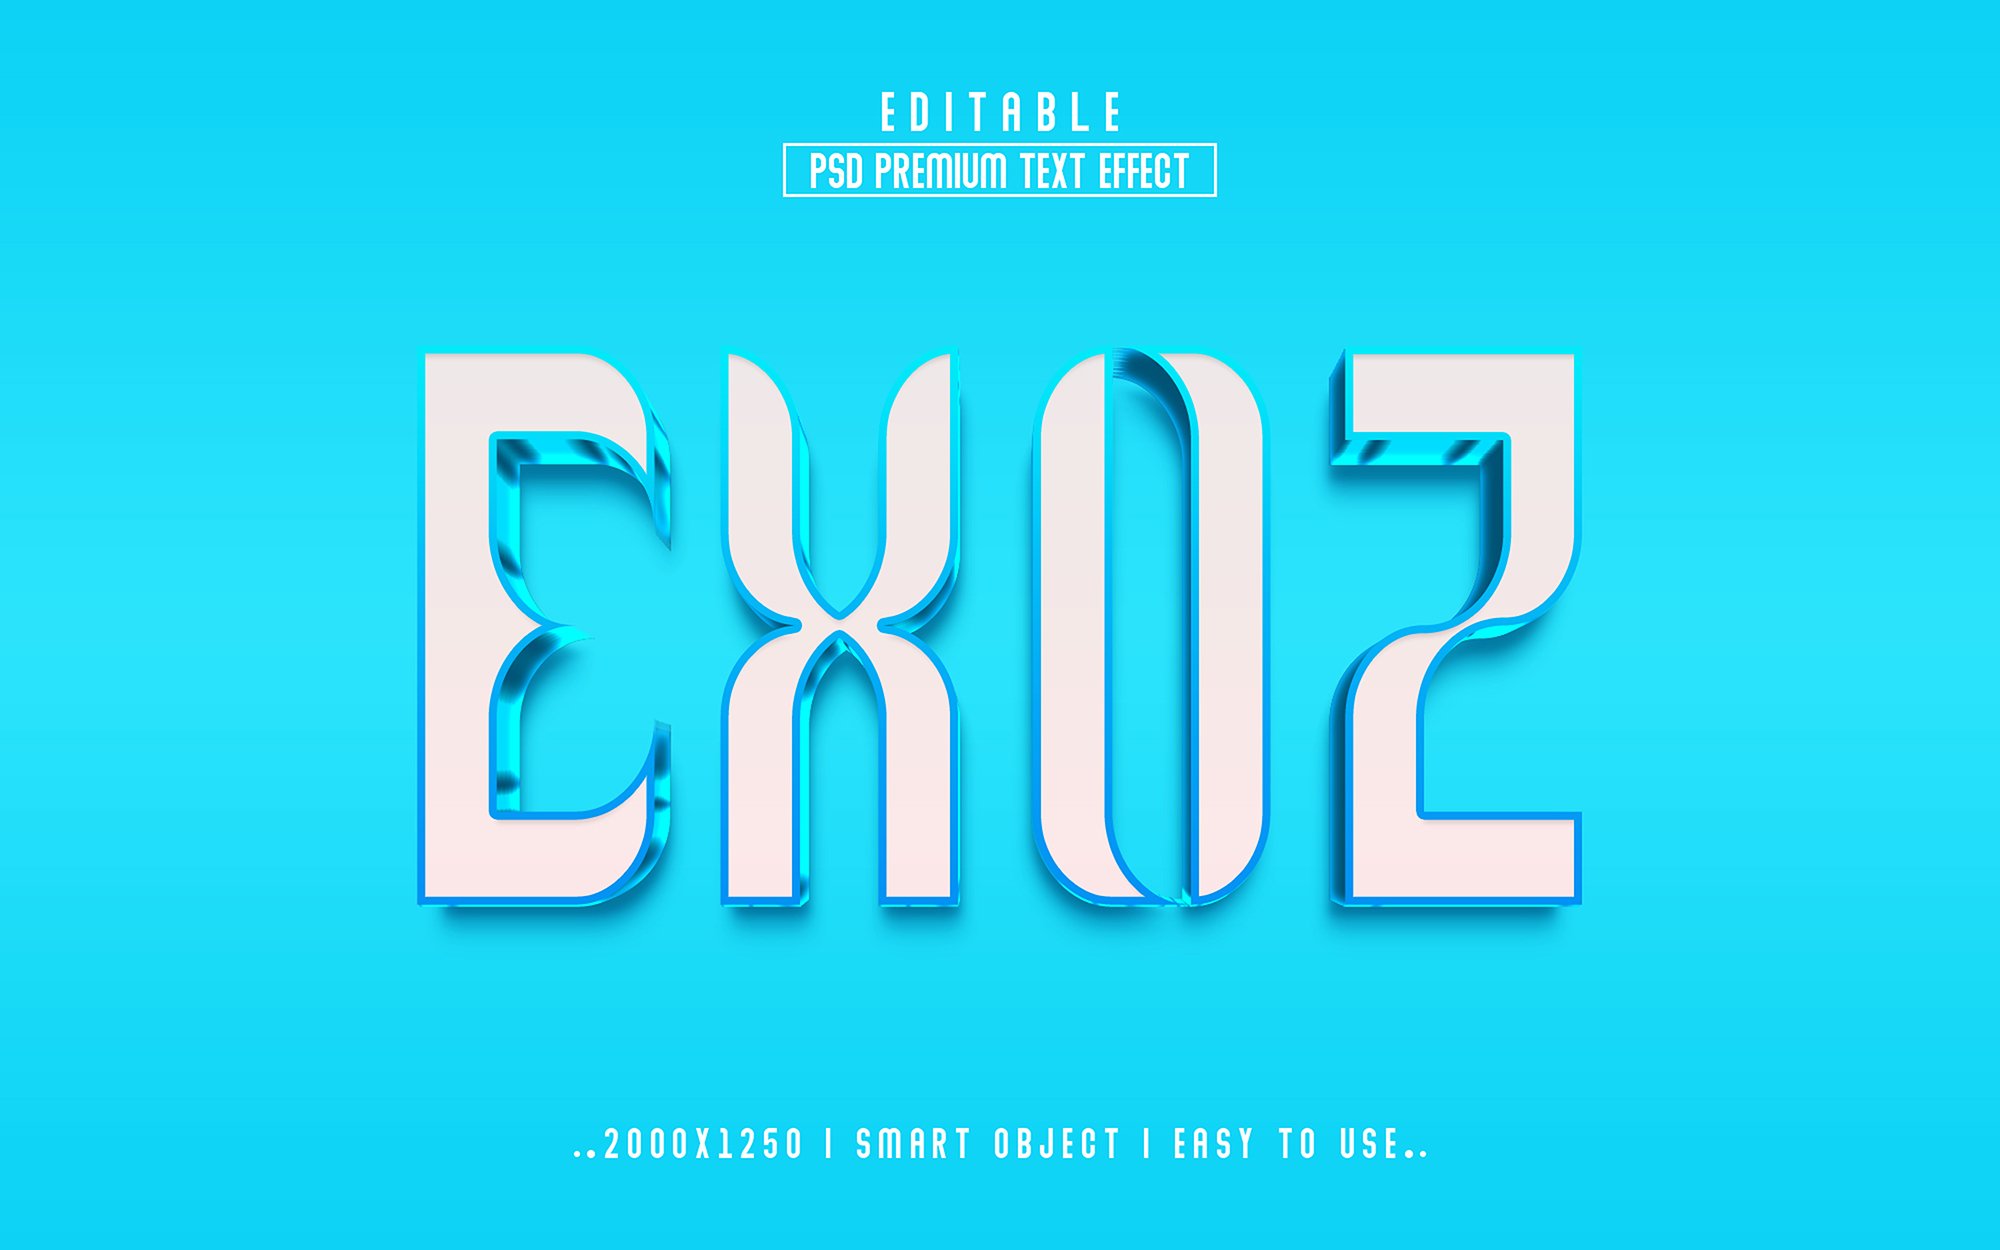 Blue and white font that reads exo2.